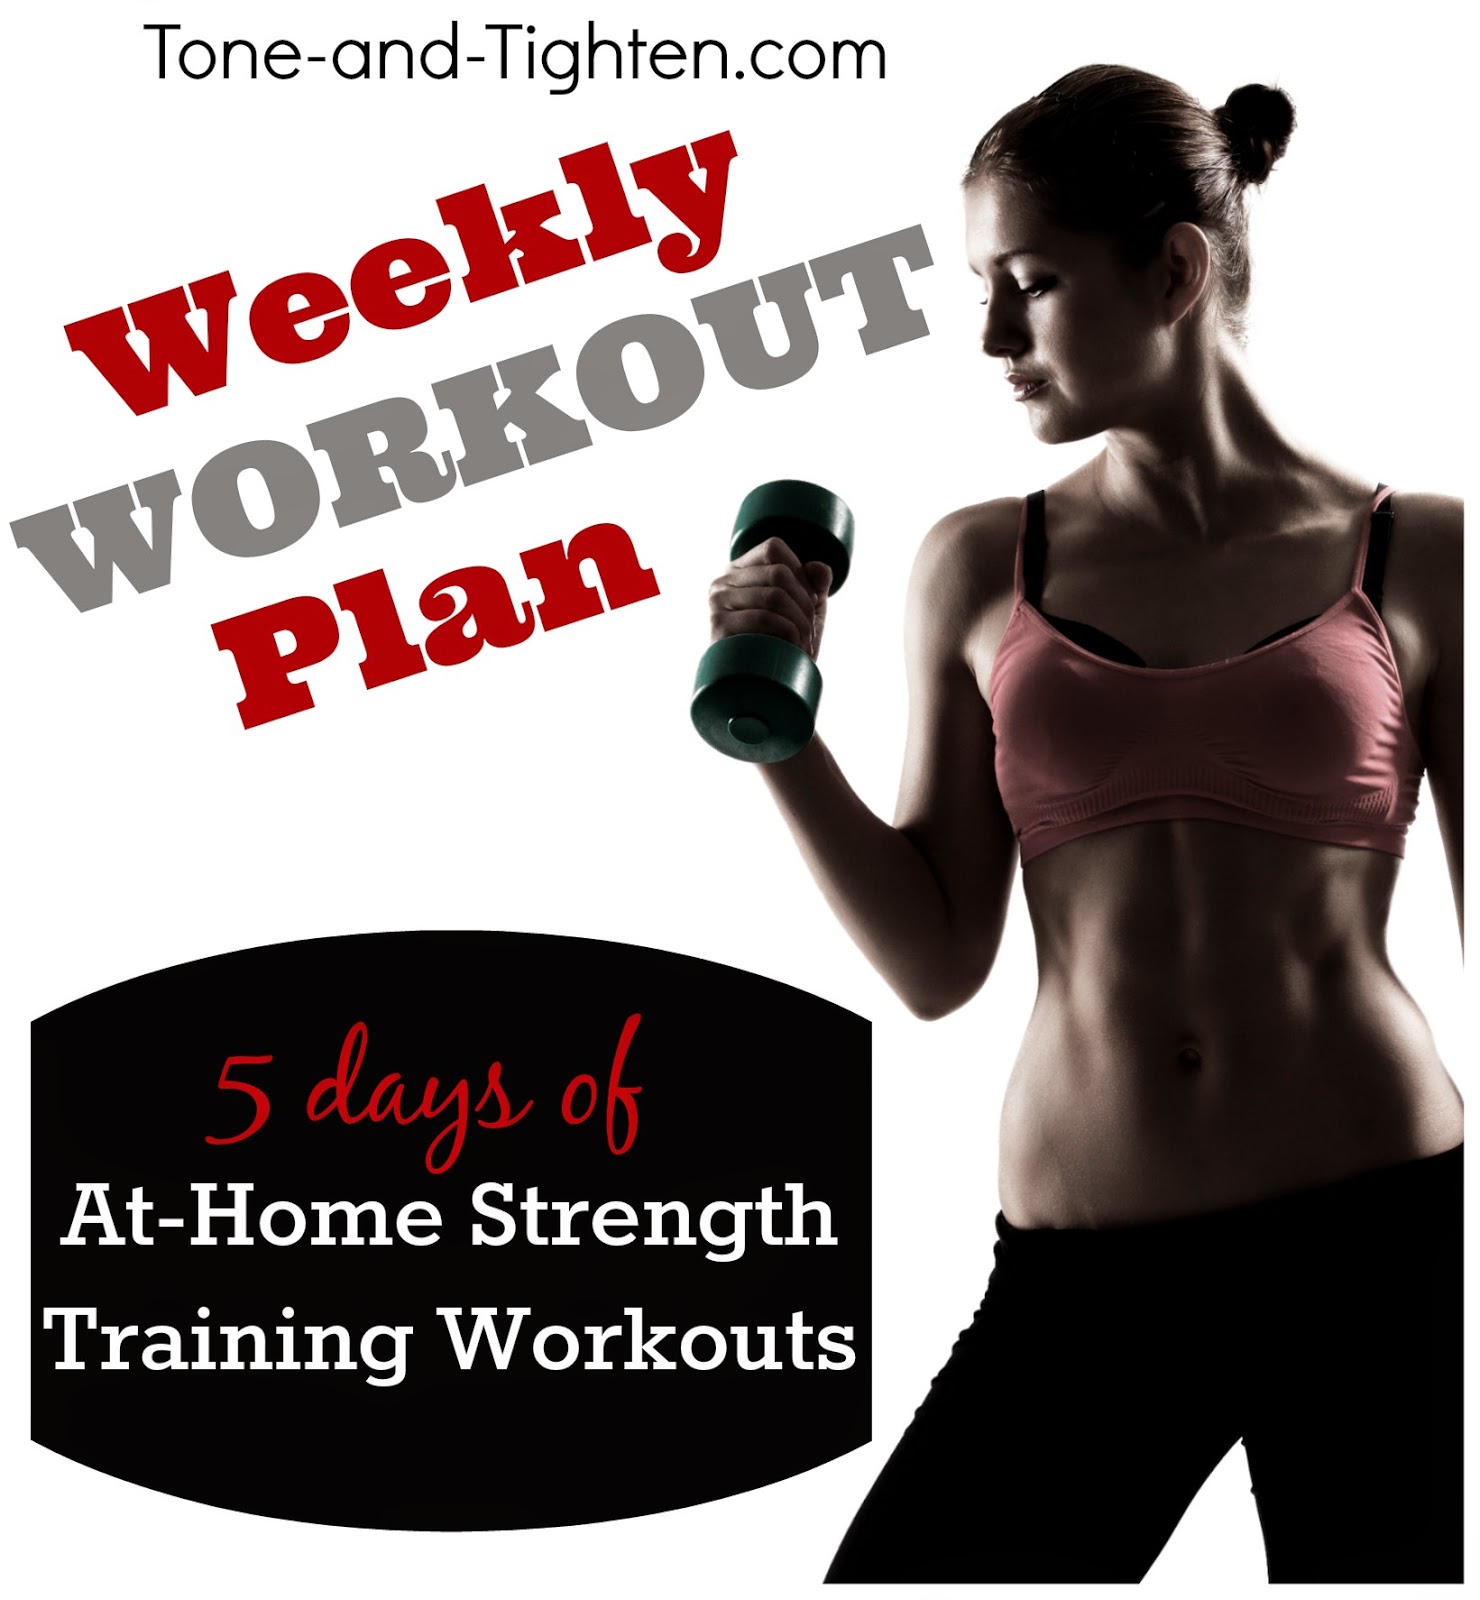 Weekly Workout Plan - The Best Quick Workouts - 30 minutes or less! 